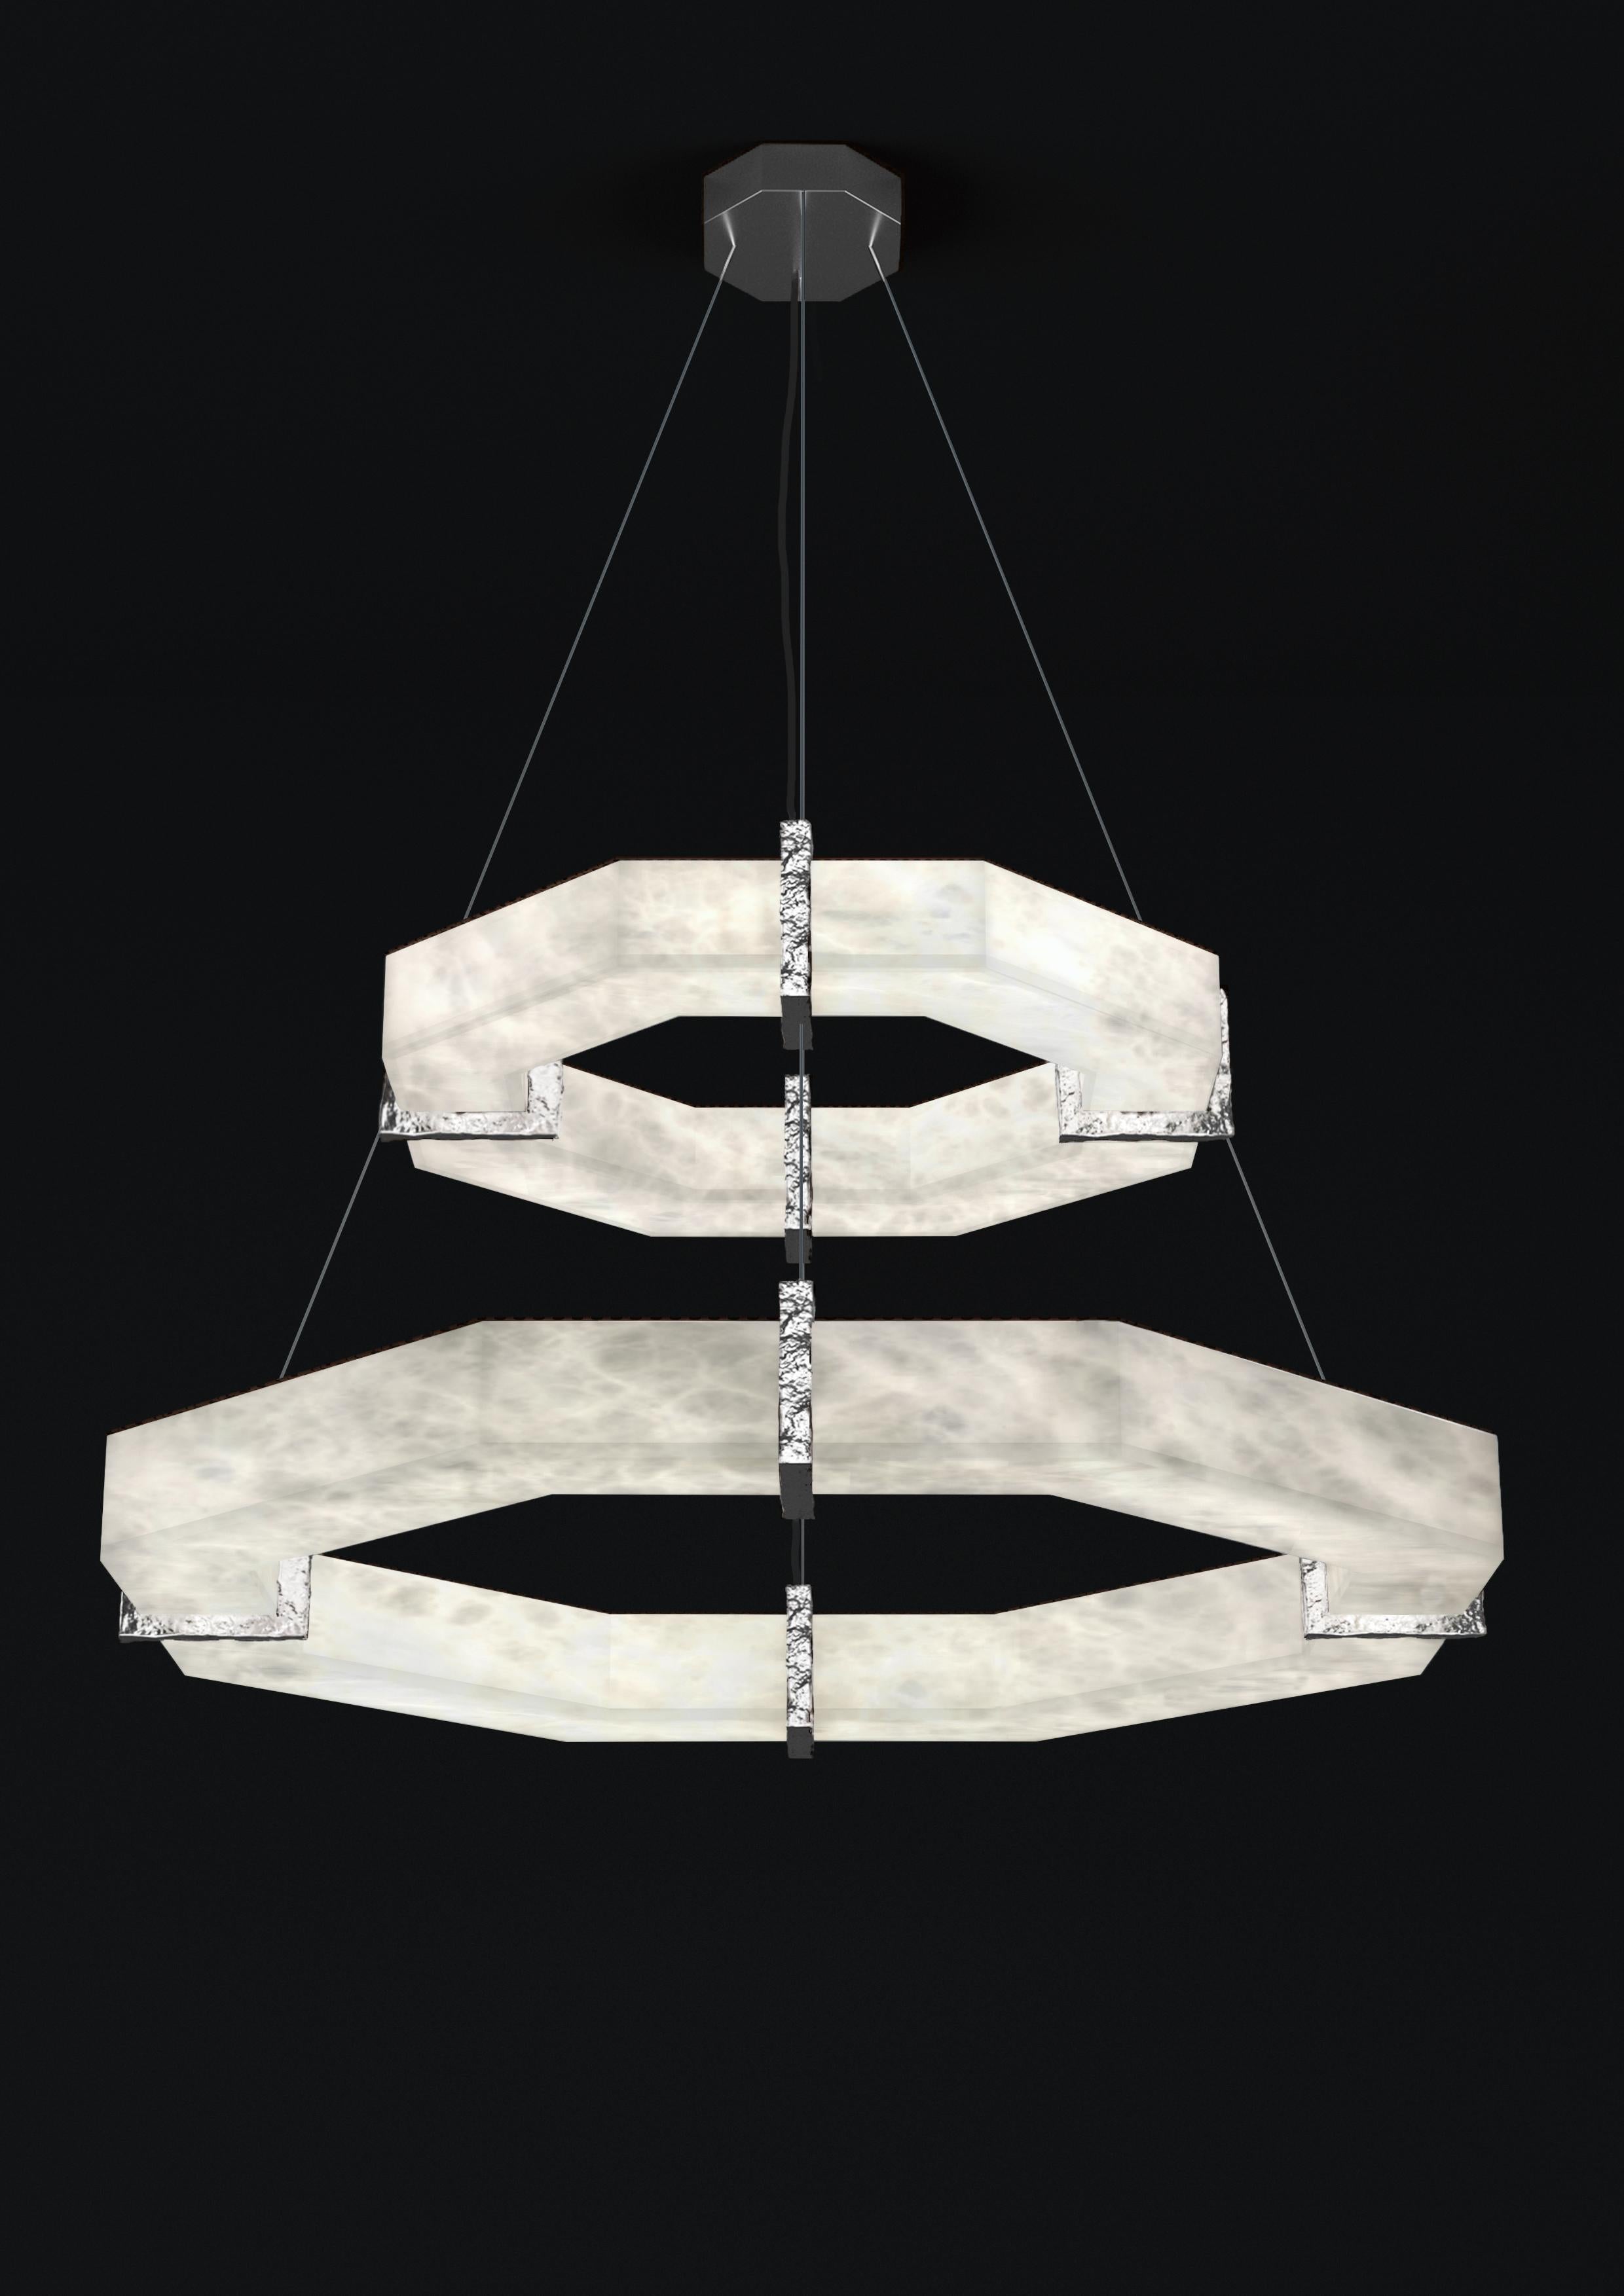 Efesto Shiny Silver Metal Double Pendant Lamp by Alabastro Italiano
Dimensions: D 80.5 x W 80.5 x H 36.5 cm.
Materials: White alabaster and metal.

Available in different finishes: Shiny Silver, Bronze, Brushed Brass, Ruggine of Florence, Brushed